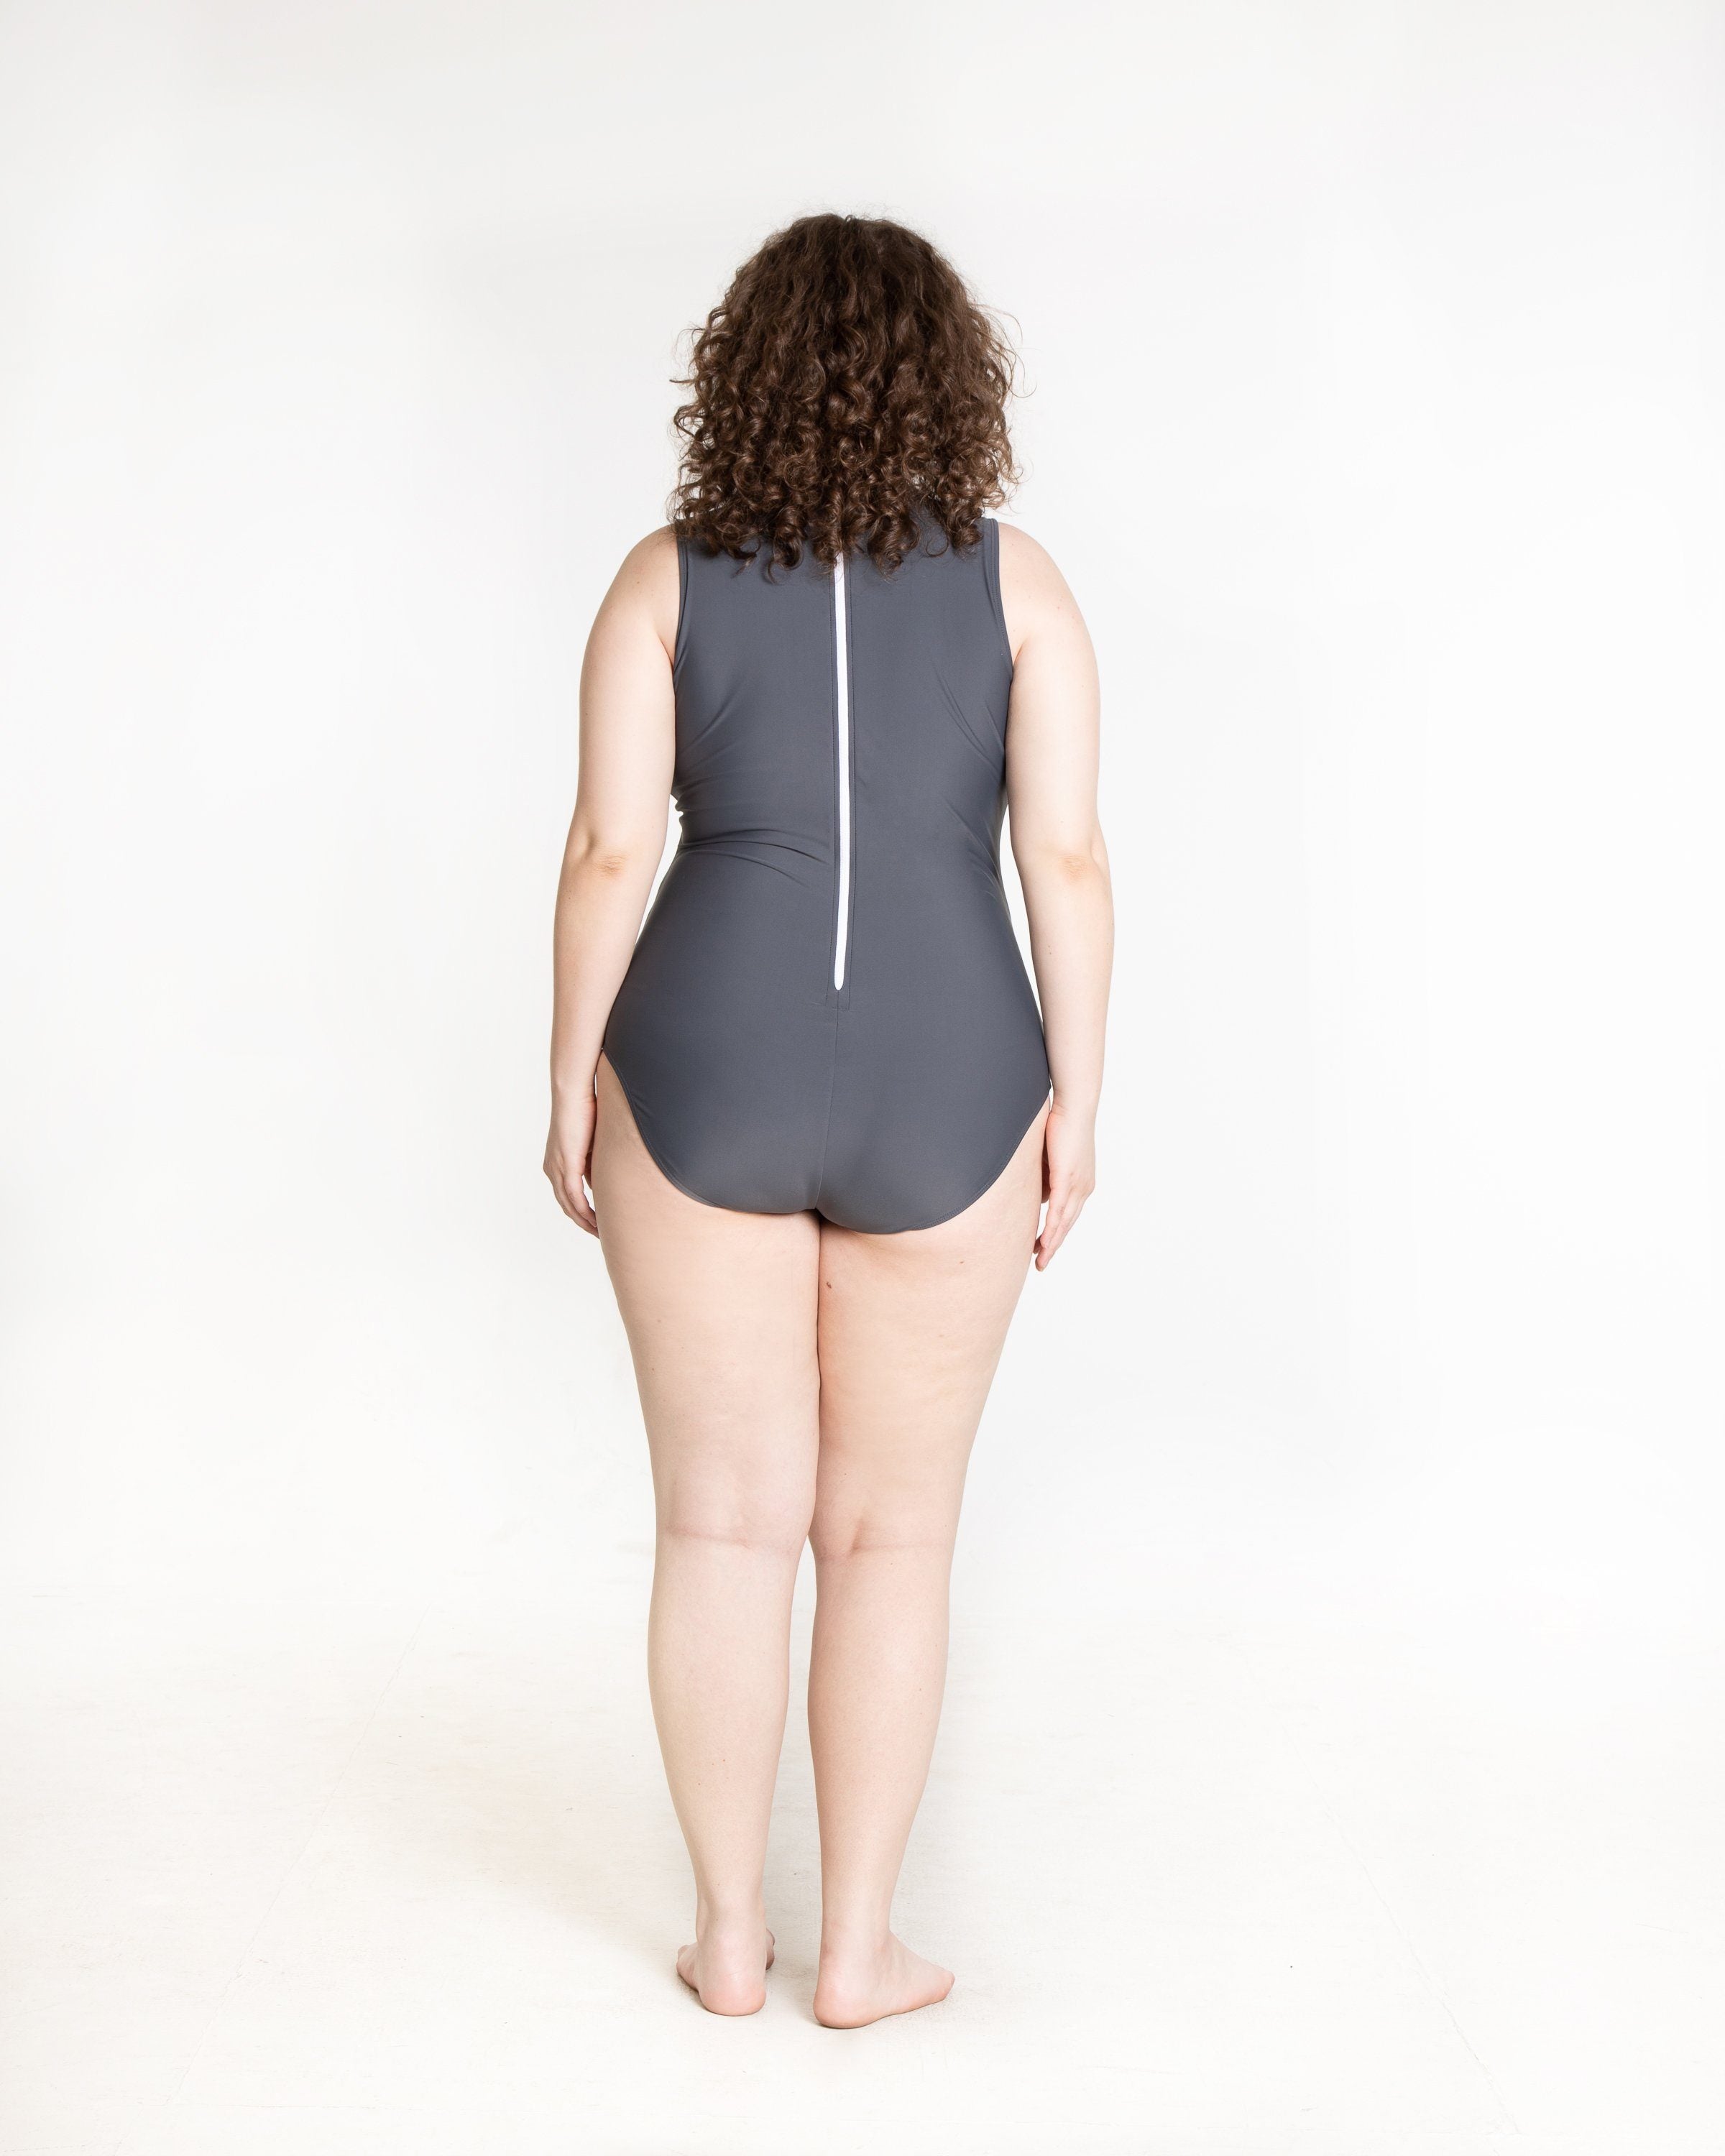 Help with swimsuit elastic? Why is the butt so saggy? : r/sewing